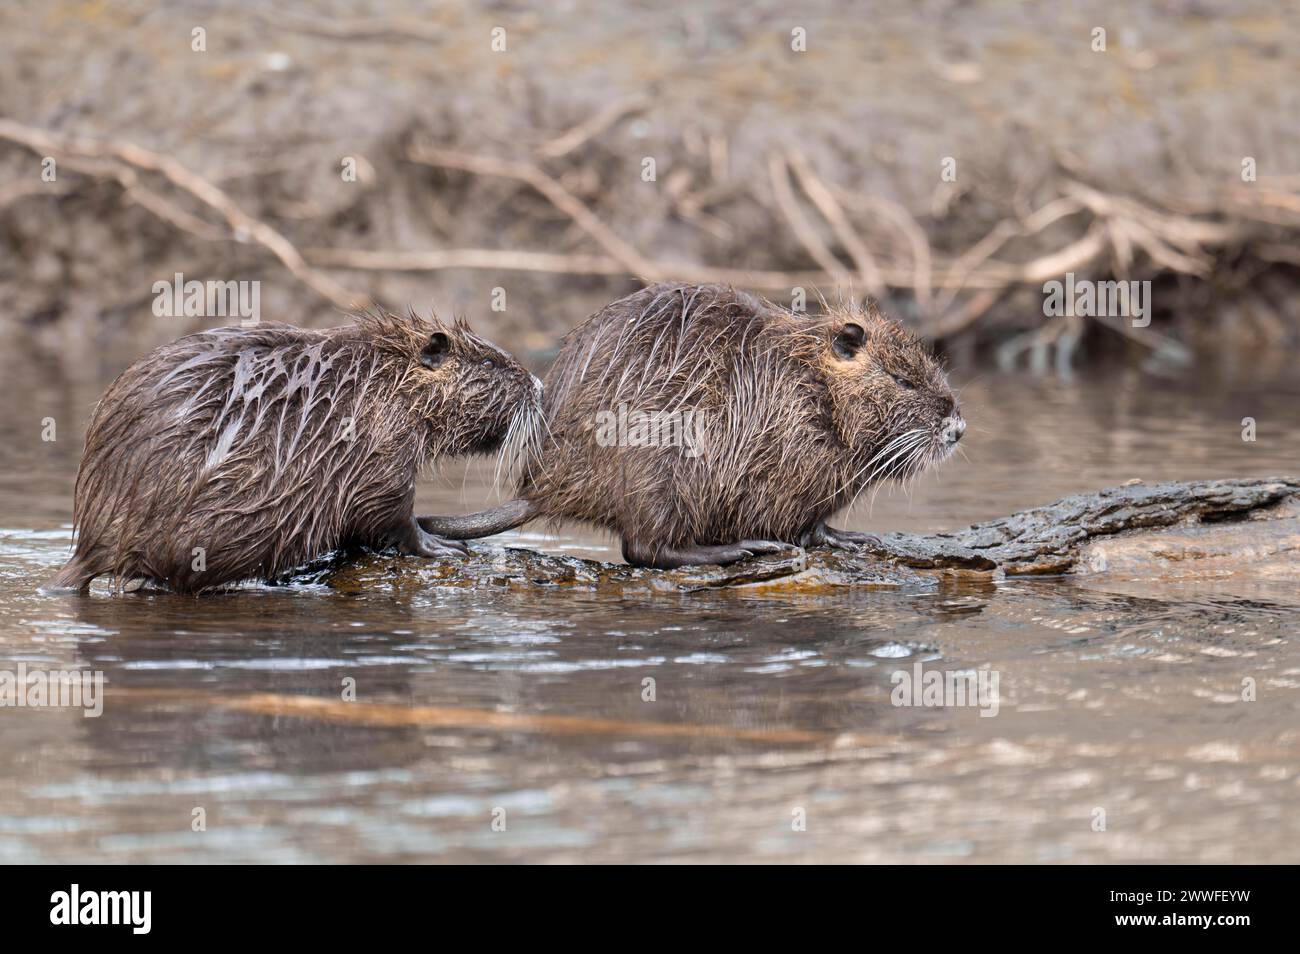 Two nutria (Myocastor coypus), wet, coming out of the water one behind the other and climbing on a branch lying in the water, profile view Stock Photo